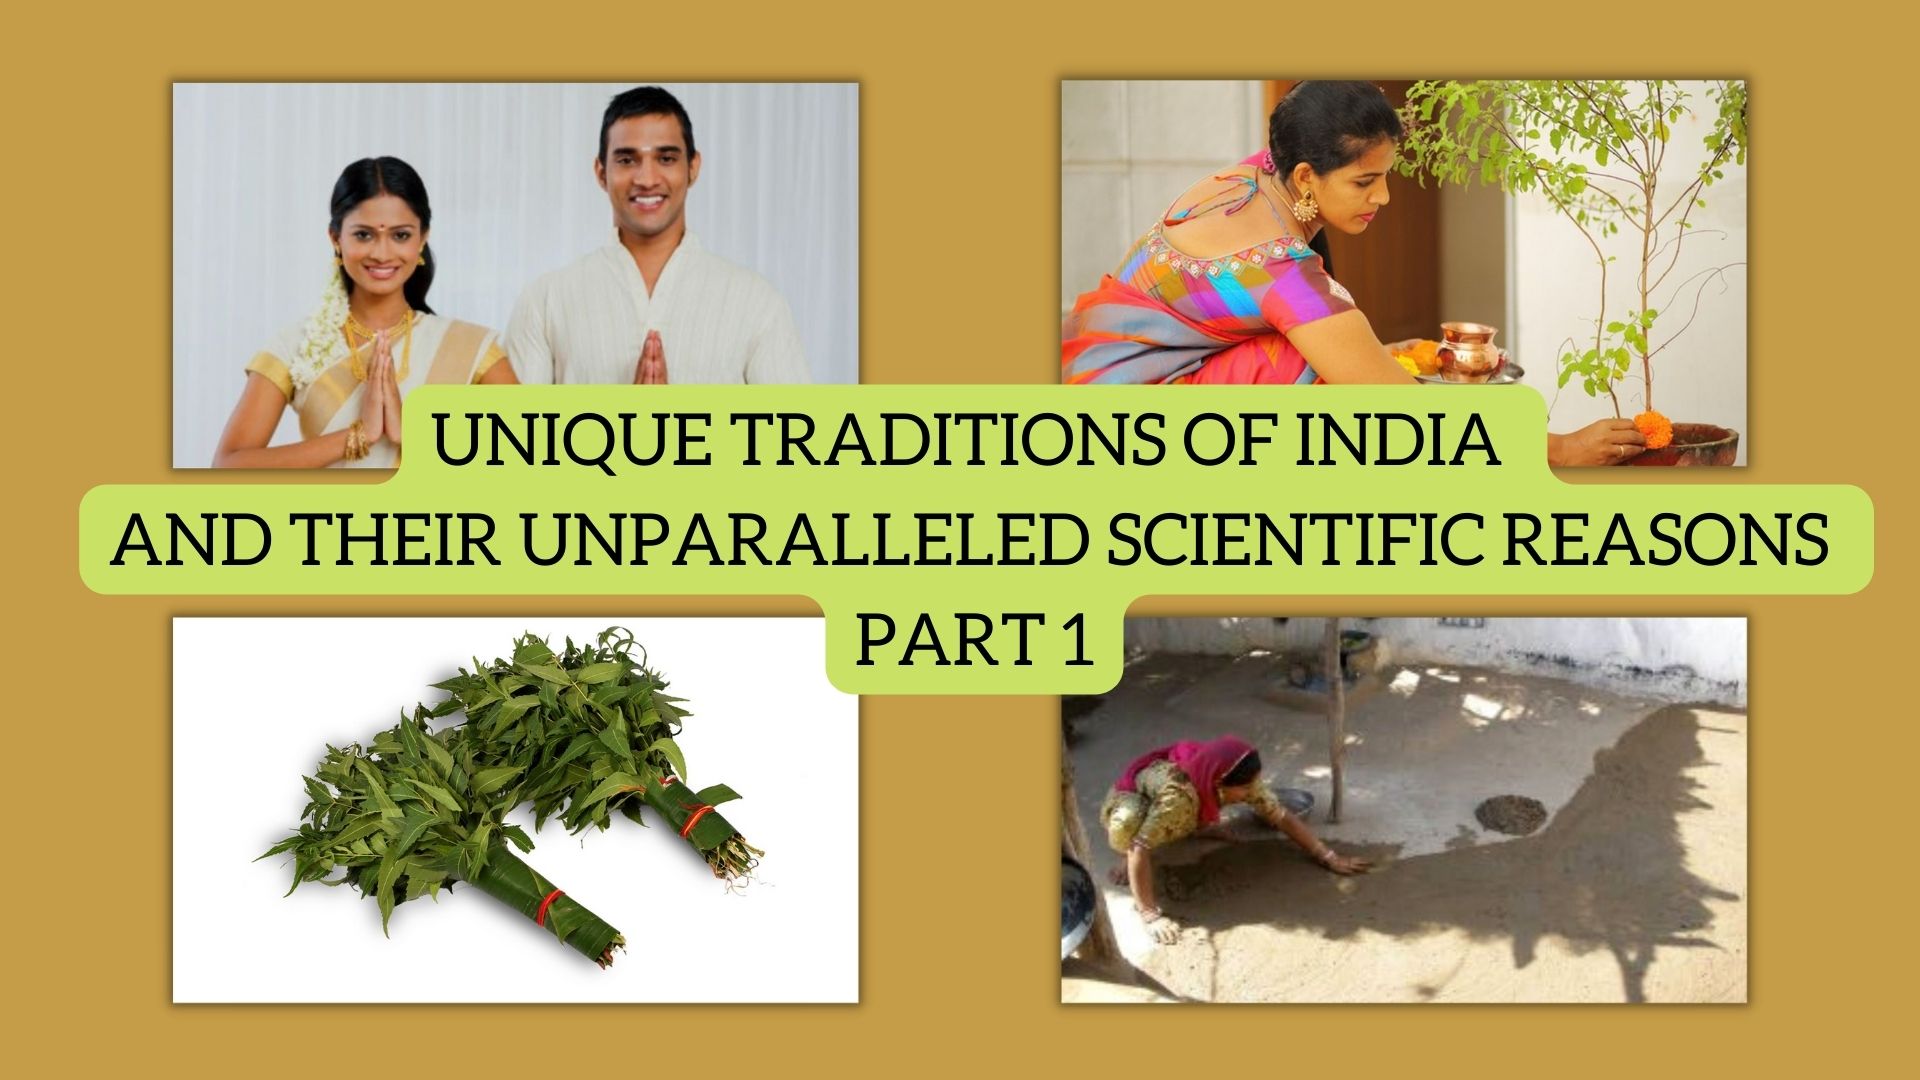 Unique Traditions of India and their Unparalleled Scientific Reasons - Part 1